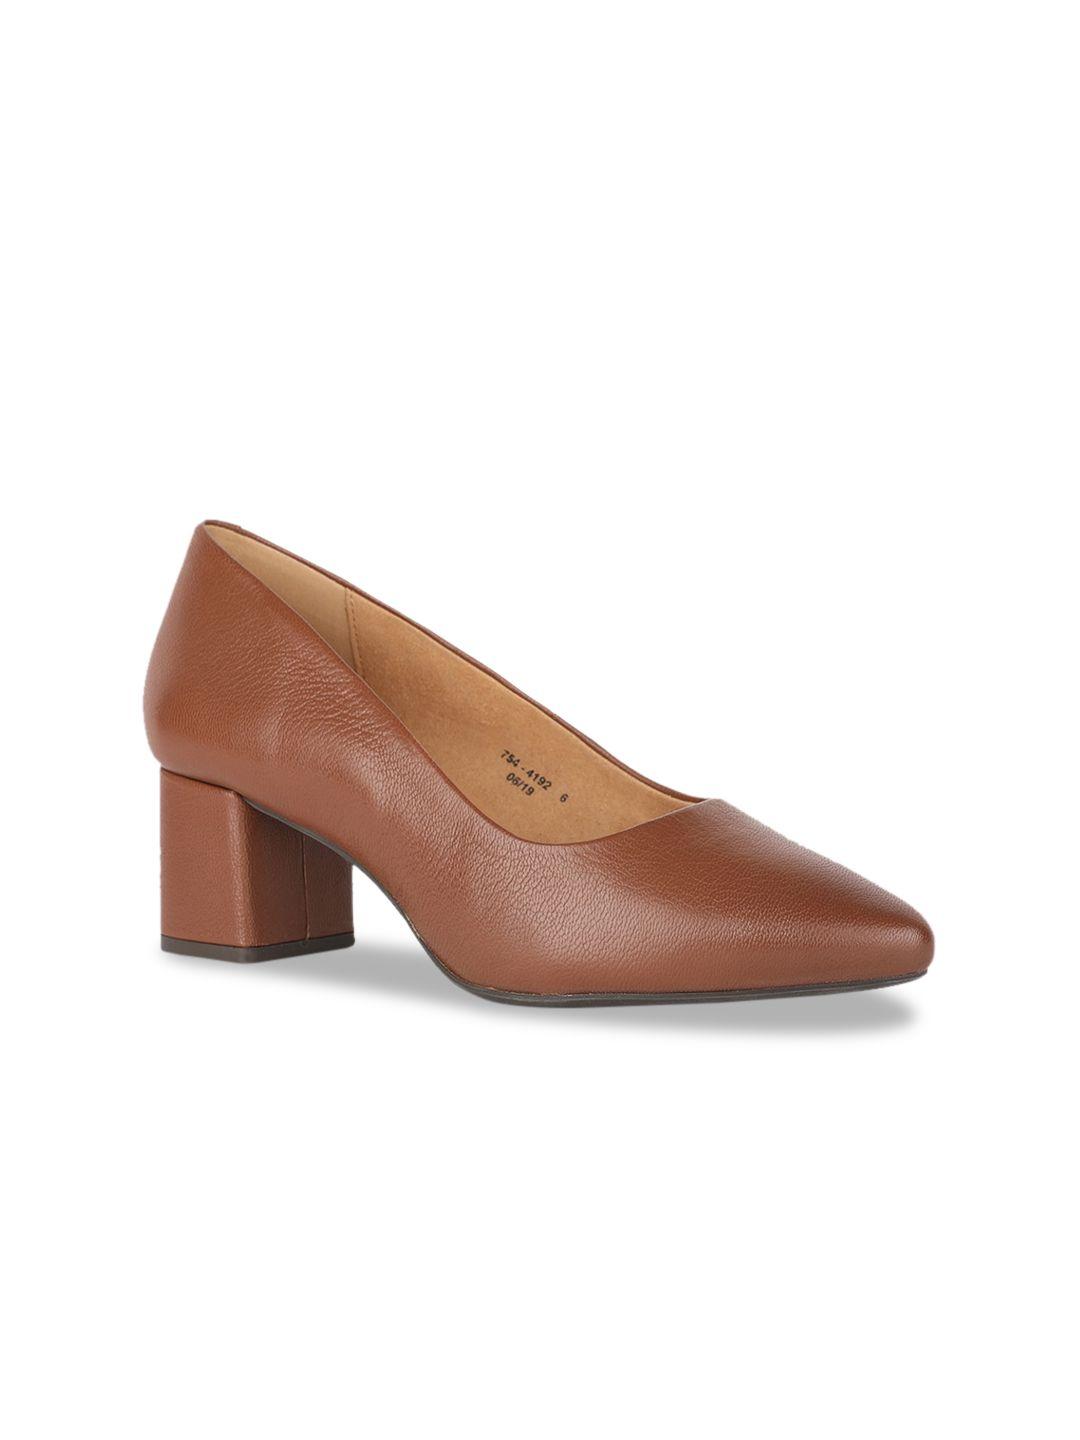 hush-puppies-women-brown-solid-leather-pumps